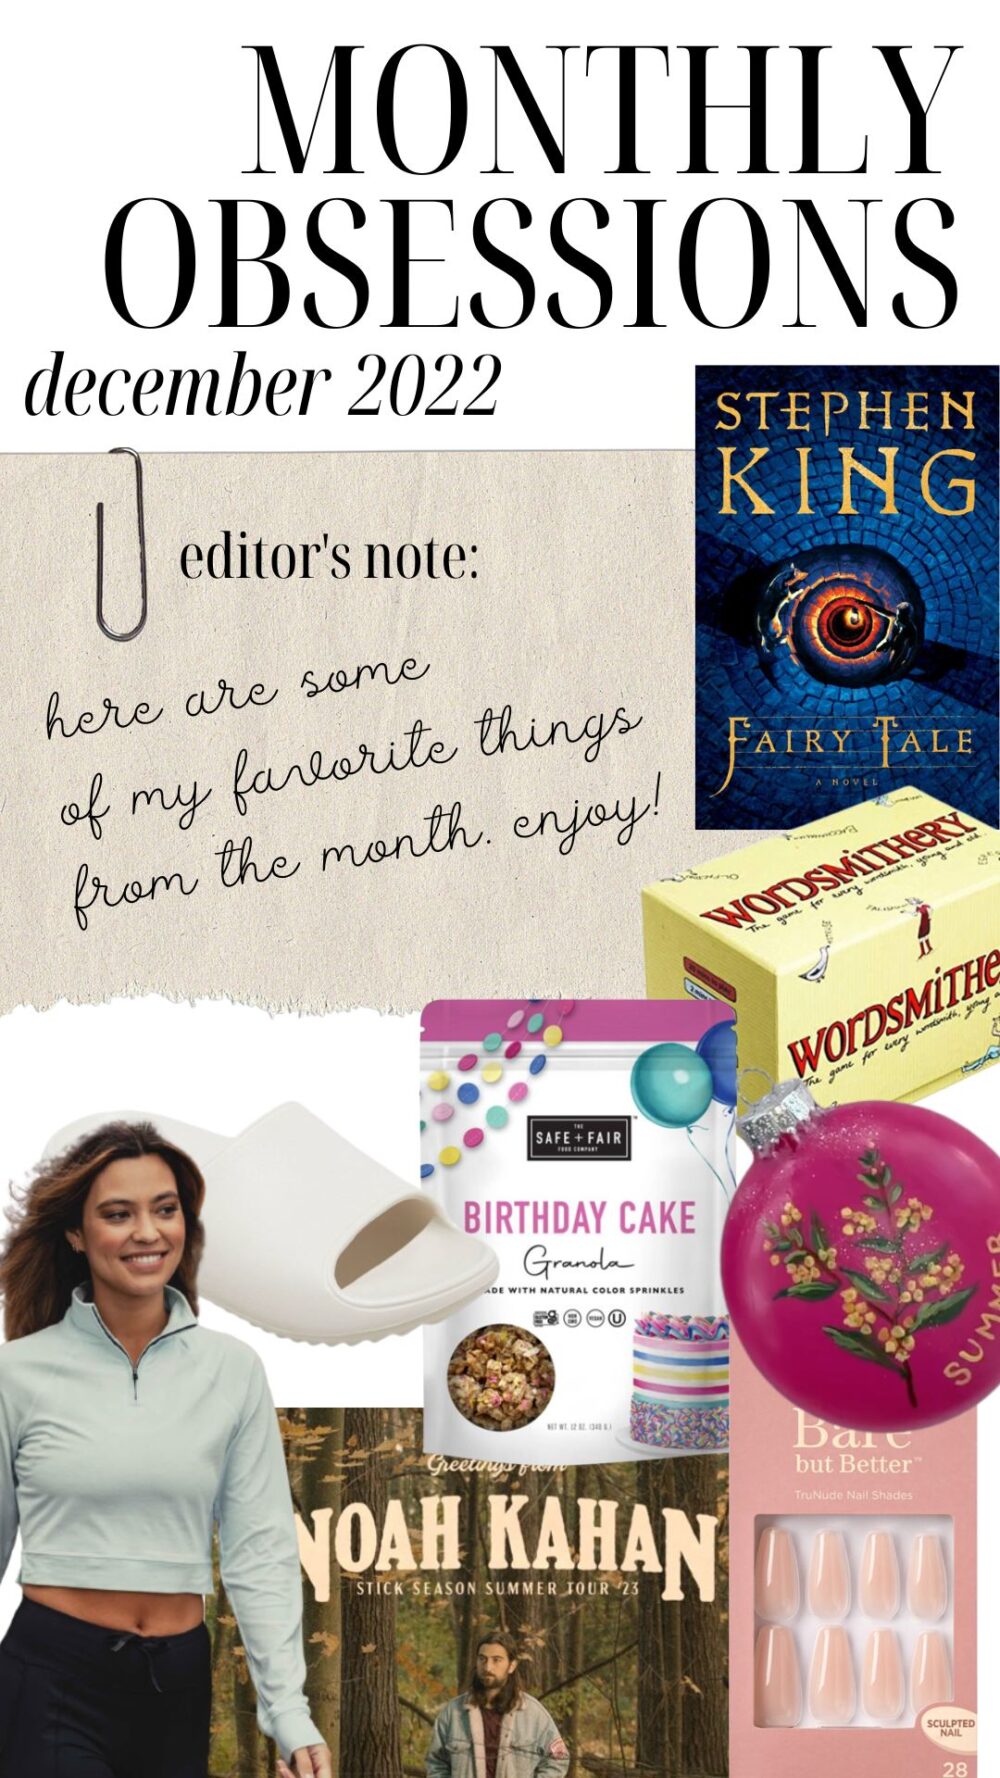 graphic with text: Monthly Obsessions December 2022. Editor's Note: here are some of my favorite things form the month enjoy! Stephen King book.